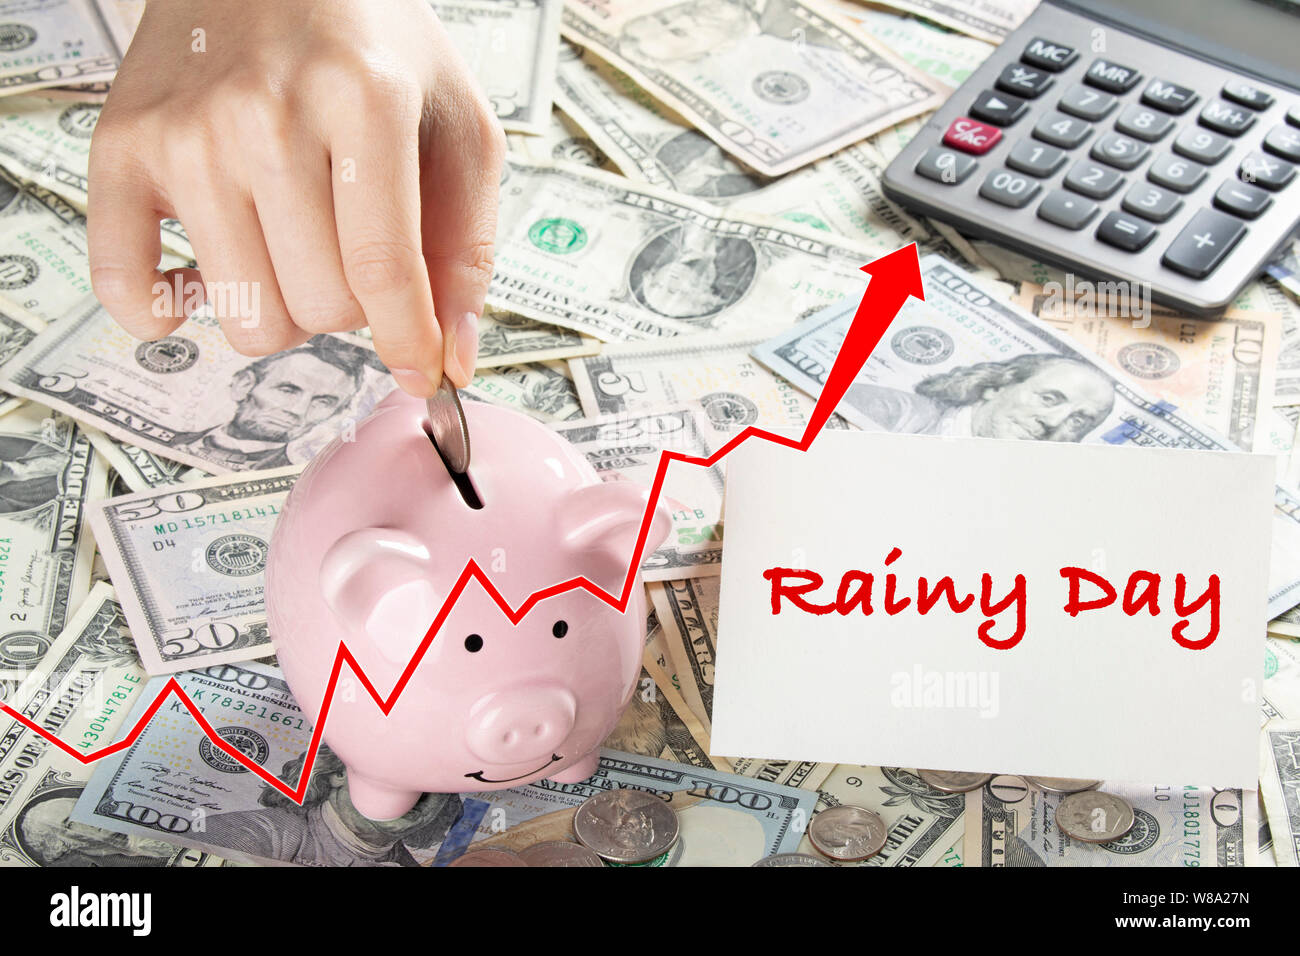 United States bank notes and coins with a calcultor, piggy bank, and hand placing coin into piggy bank and a card that says Rainy Day Stock Photo